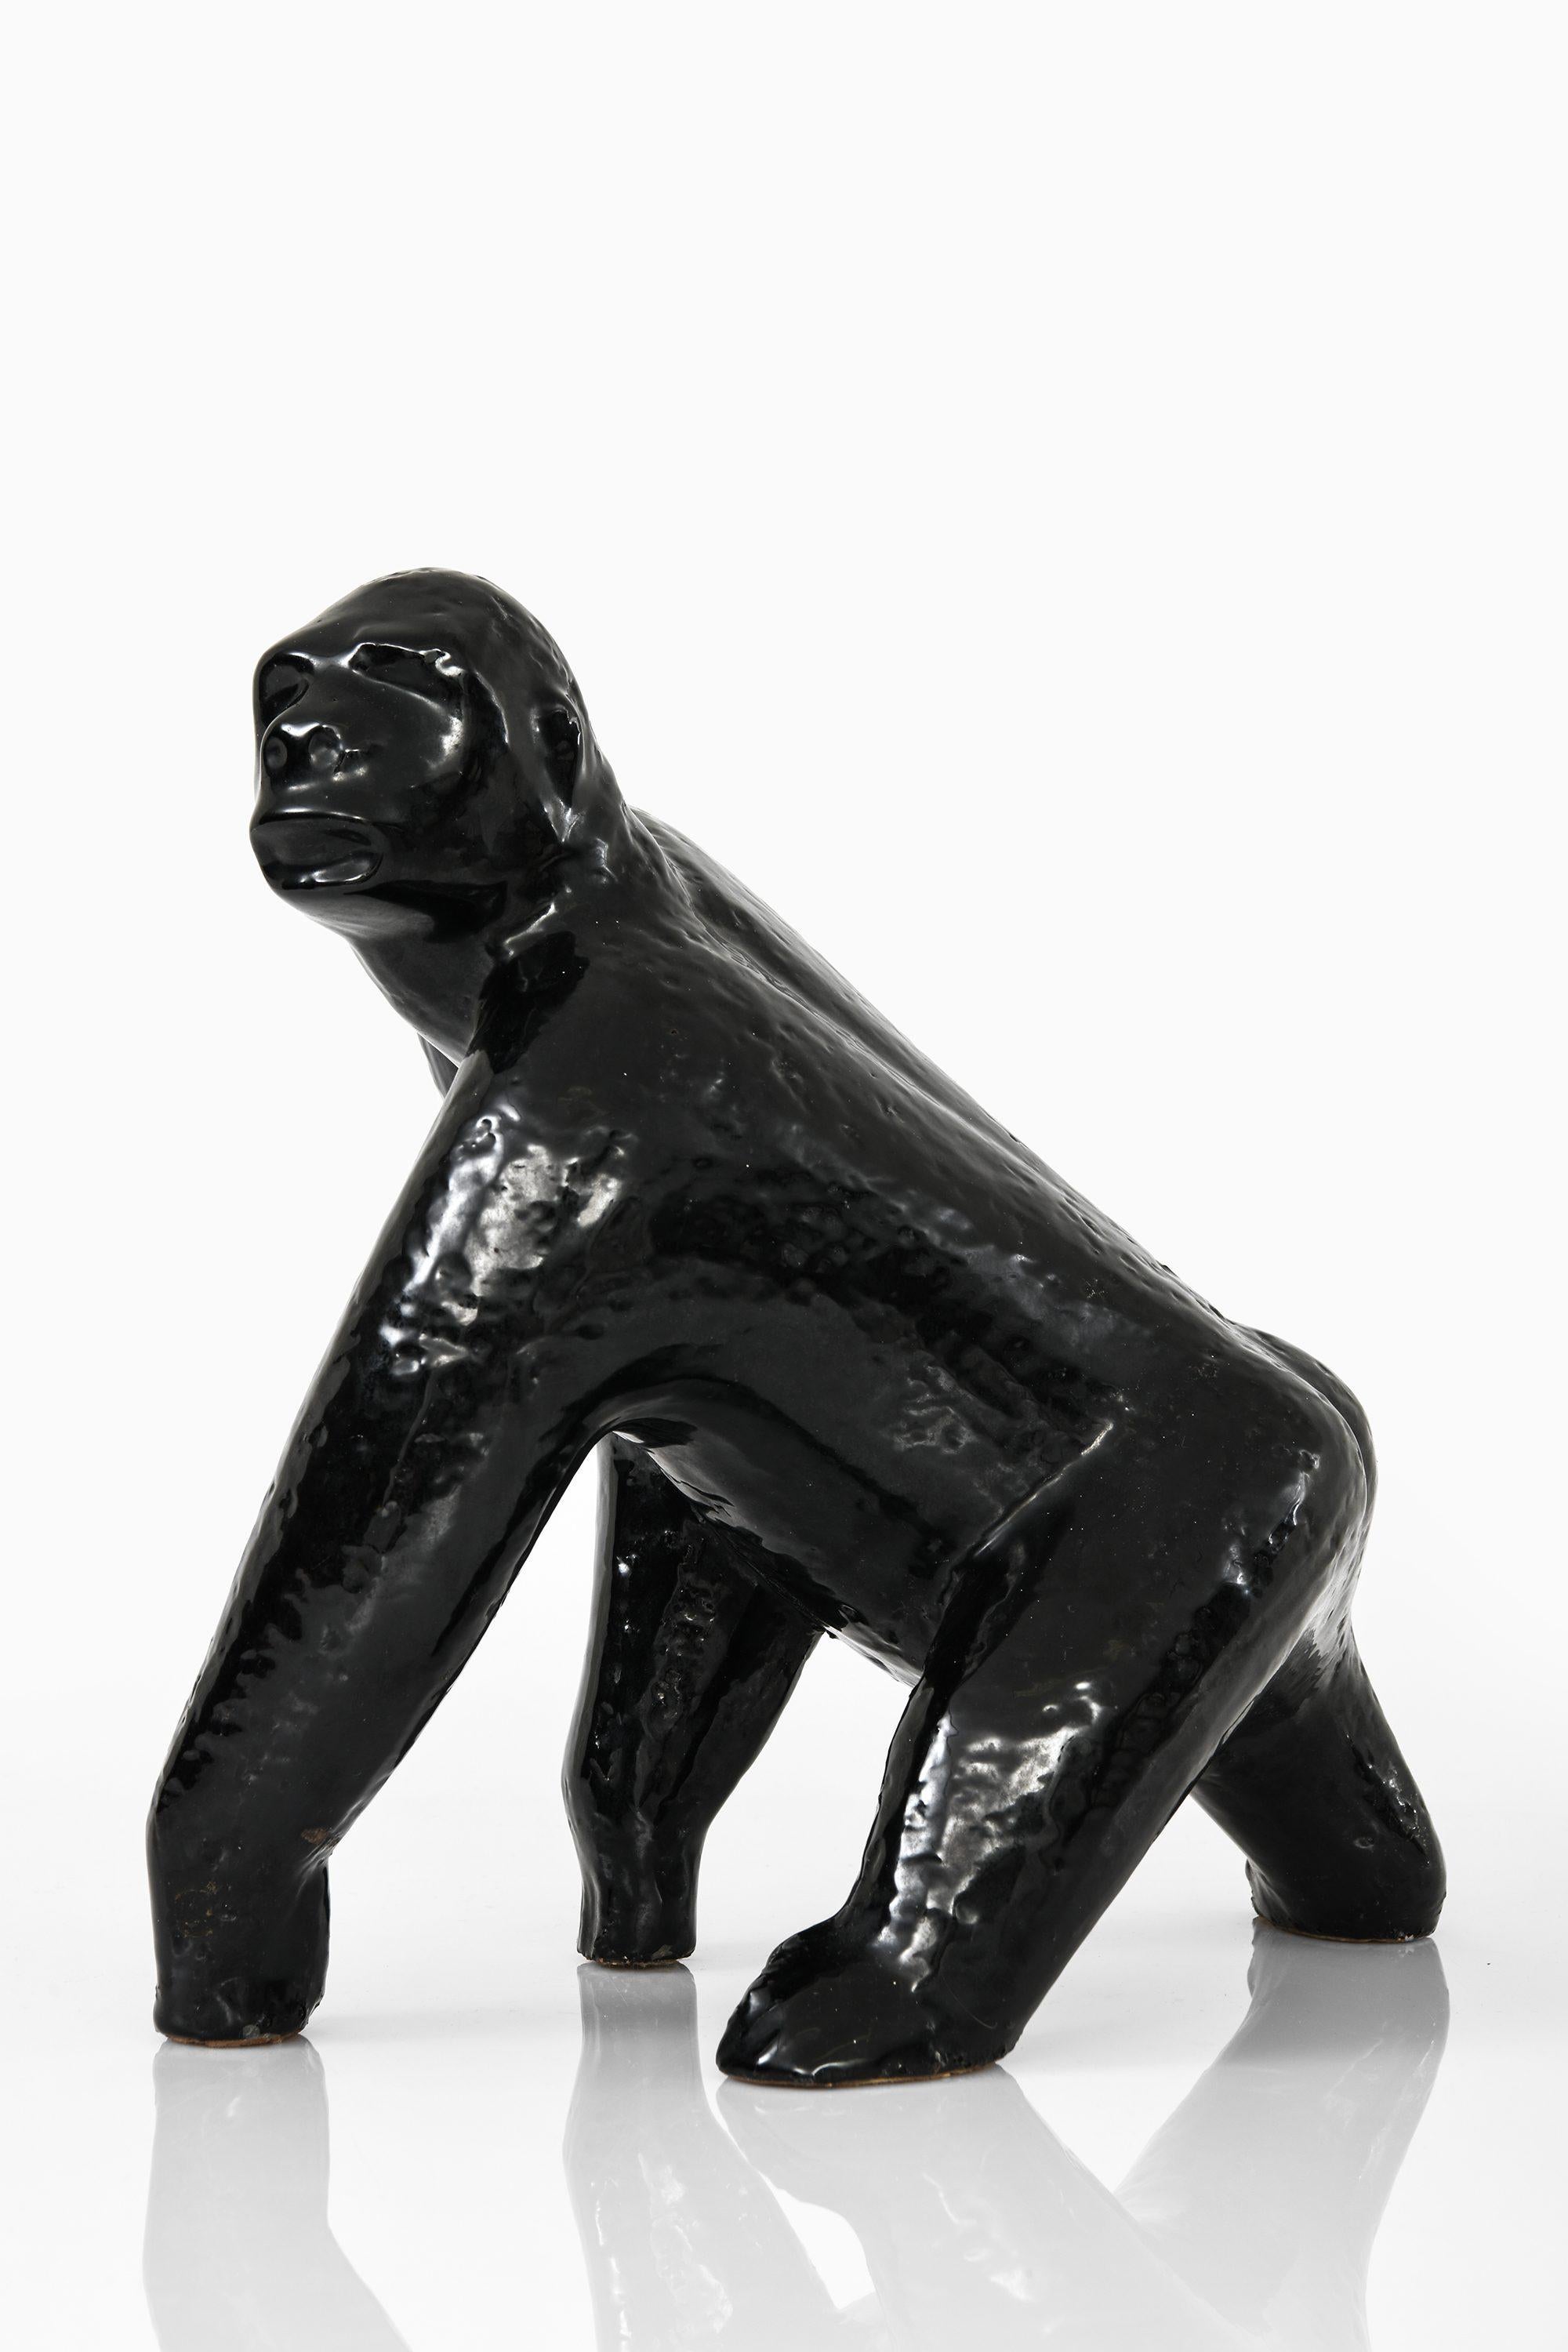 Gorilla Sculpture, 1960's

Additional Information:
Style: Mid century, Scandinavian
Produced by Gabriel in Sweden
Dimensions (W x D x H): 20 x 26 x 29 cm
Condition: Good vintage condition, with small signs of usage